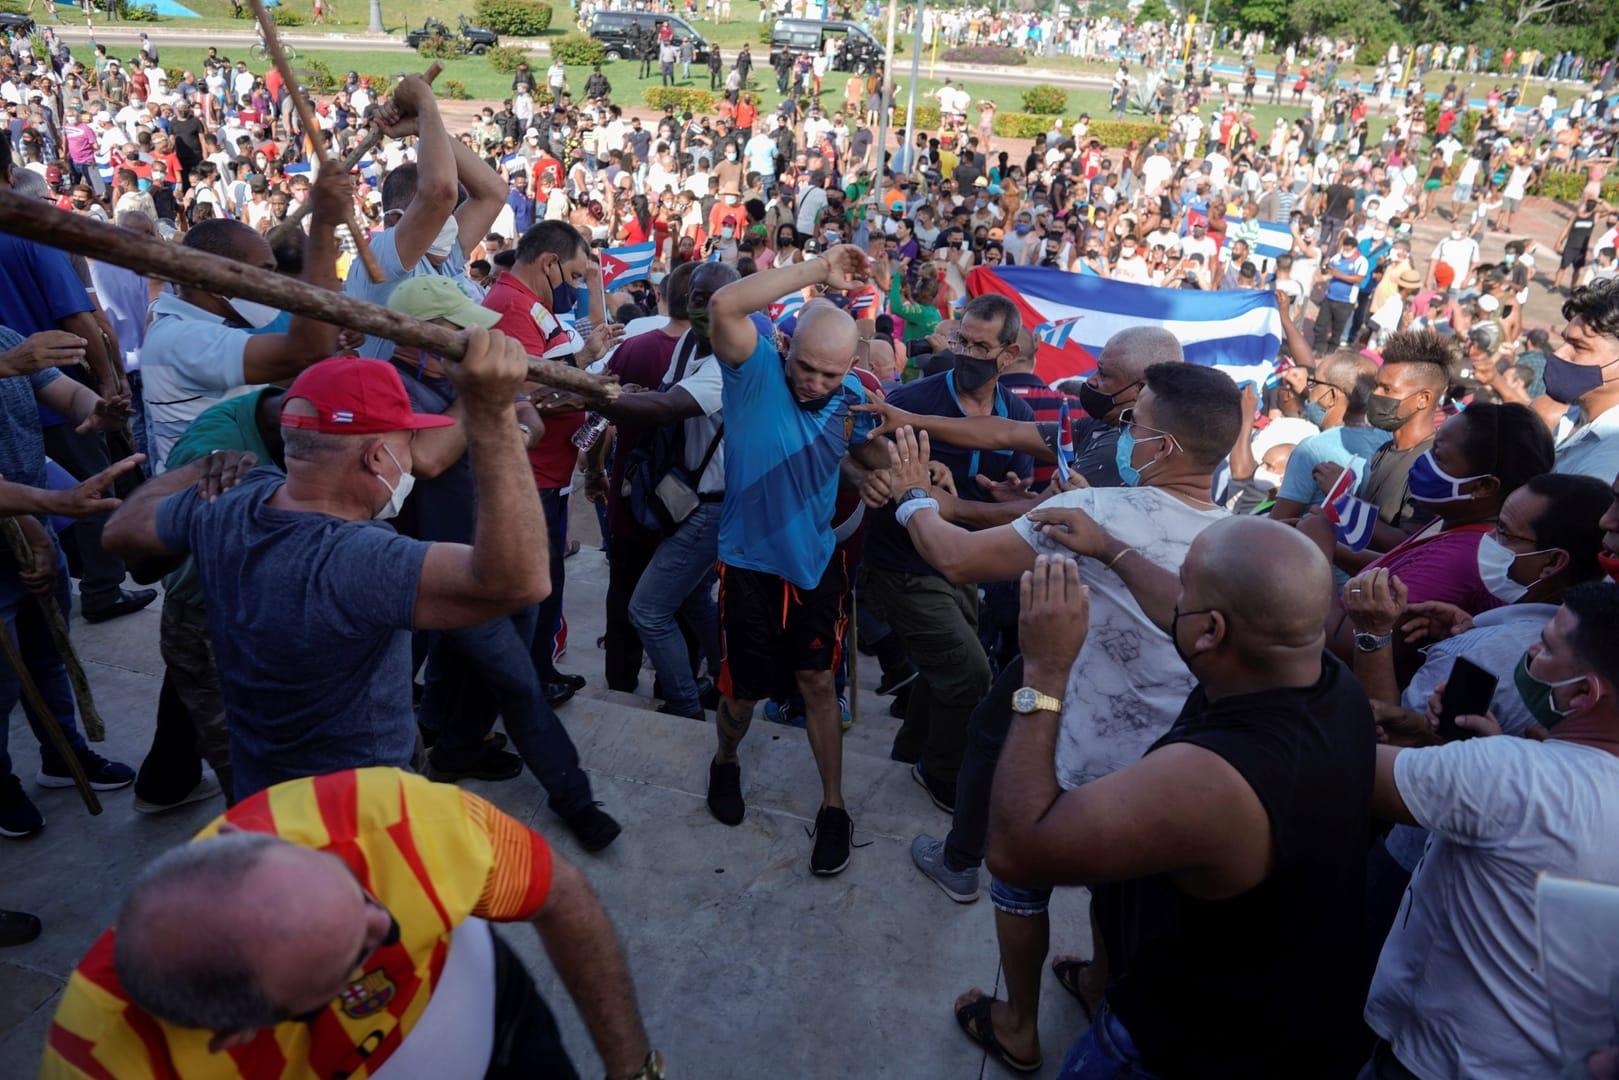 As bishops urge calm, Cuban priest sees ‘world of emotions’ under protests